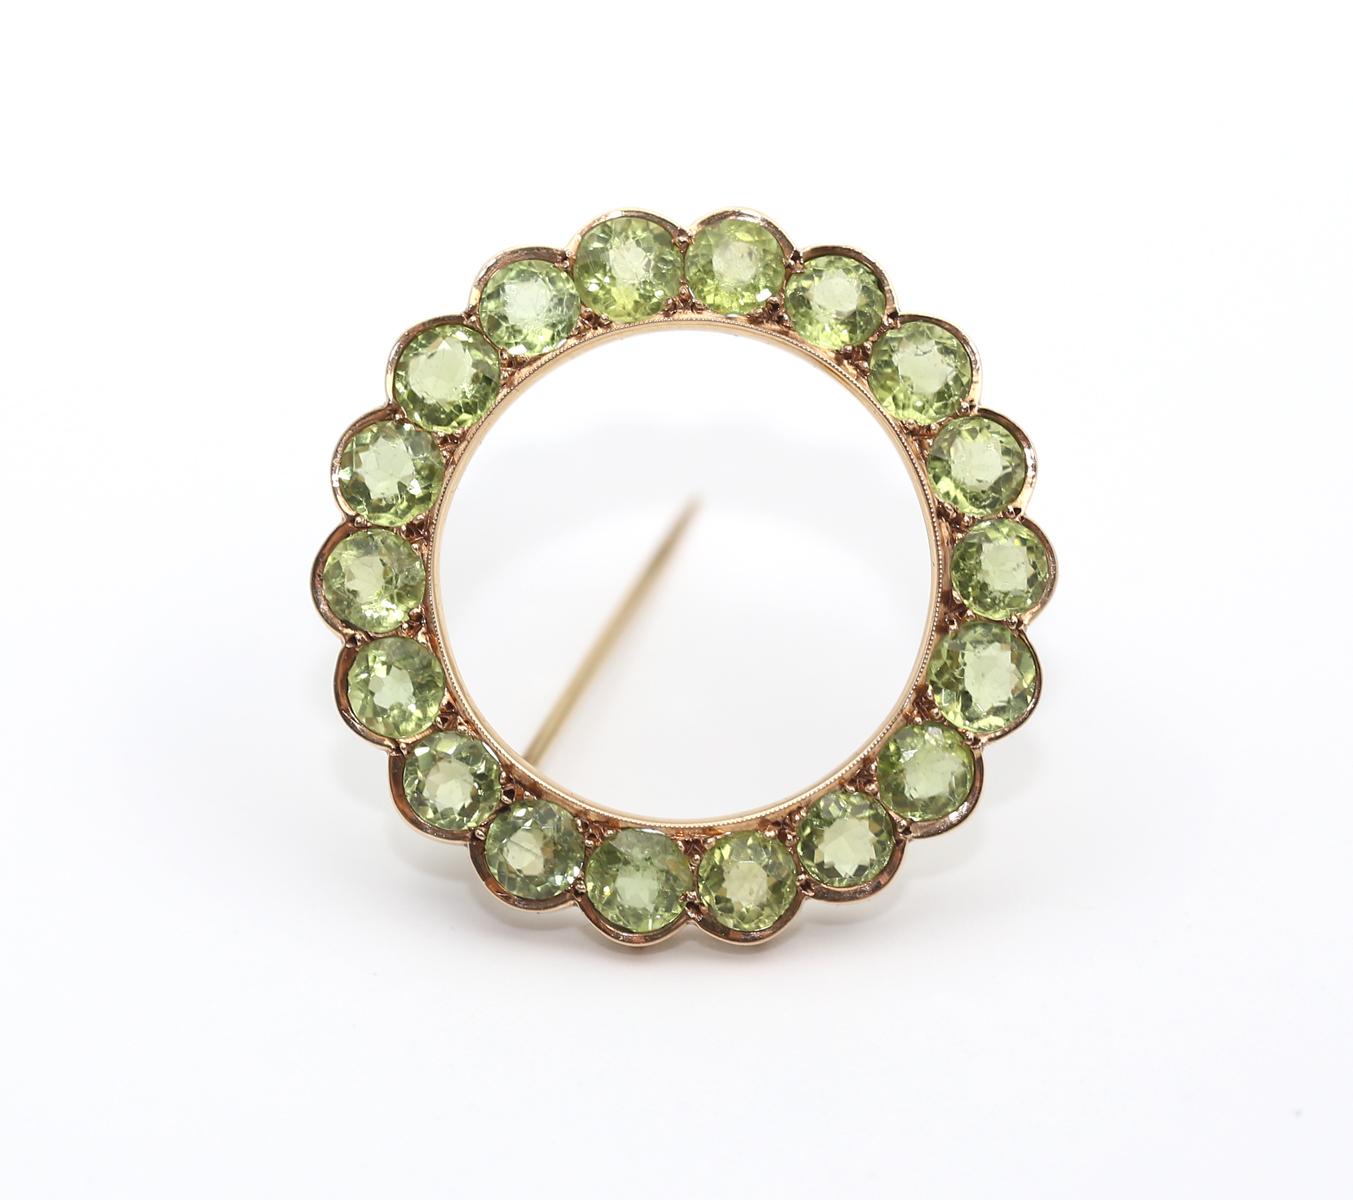 Victorian Peridot Circle Brooch Pin Yellow Gold. Created around 1900. 
A fine antique Peridot circle brooch/pin in Yellow Gold. 
Set all around with a row of round cut fine Peridots. 
No assay marks. The color of the stones is just wonderful and it